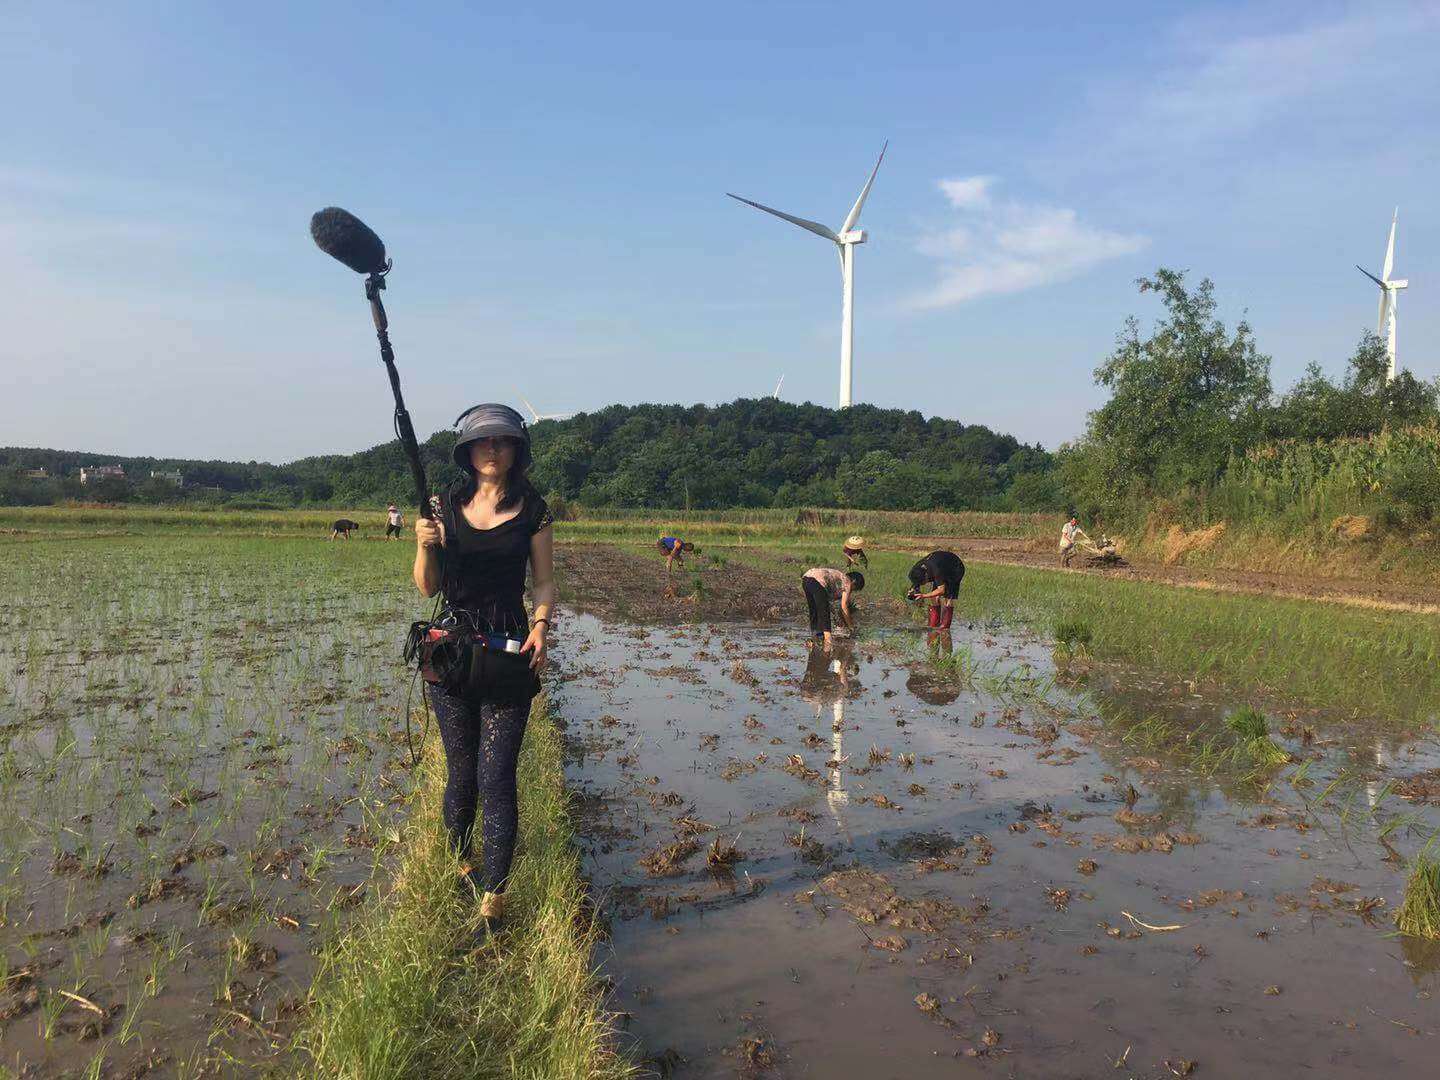 Production still from Hidden Letters. A woman is walking on an elevated grassy row in a rice field. She is wearing headphones and a utility bag around her waist, and is carrying a boom microphone. Behind her, there are several women bent over working in the rice field, and two white windmills in the distance.